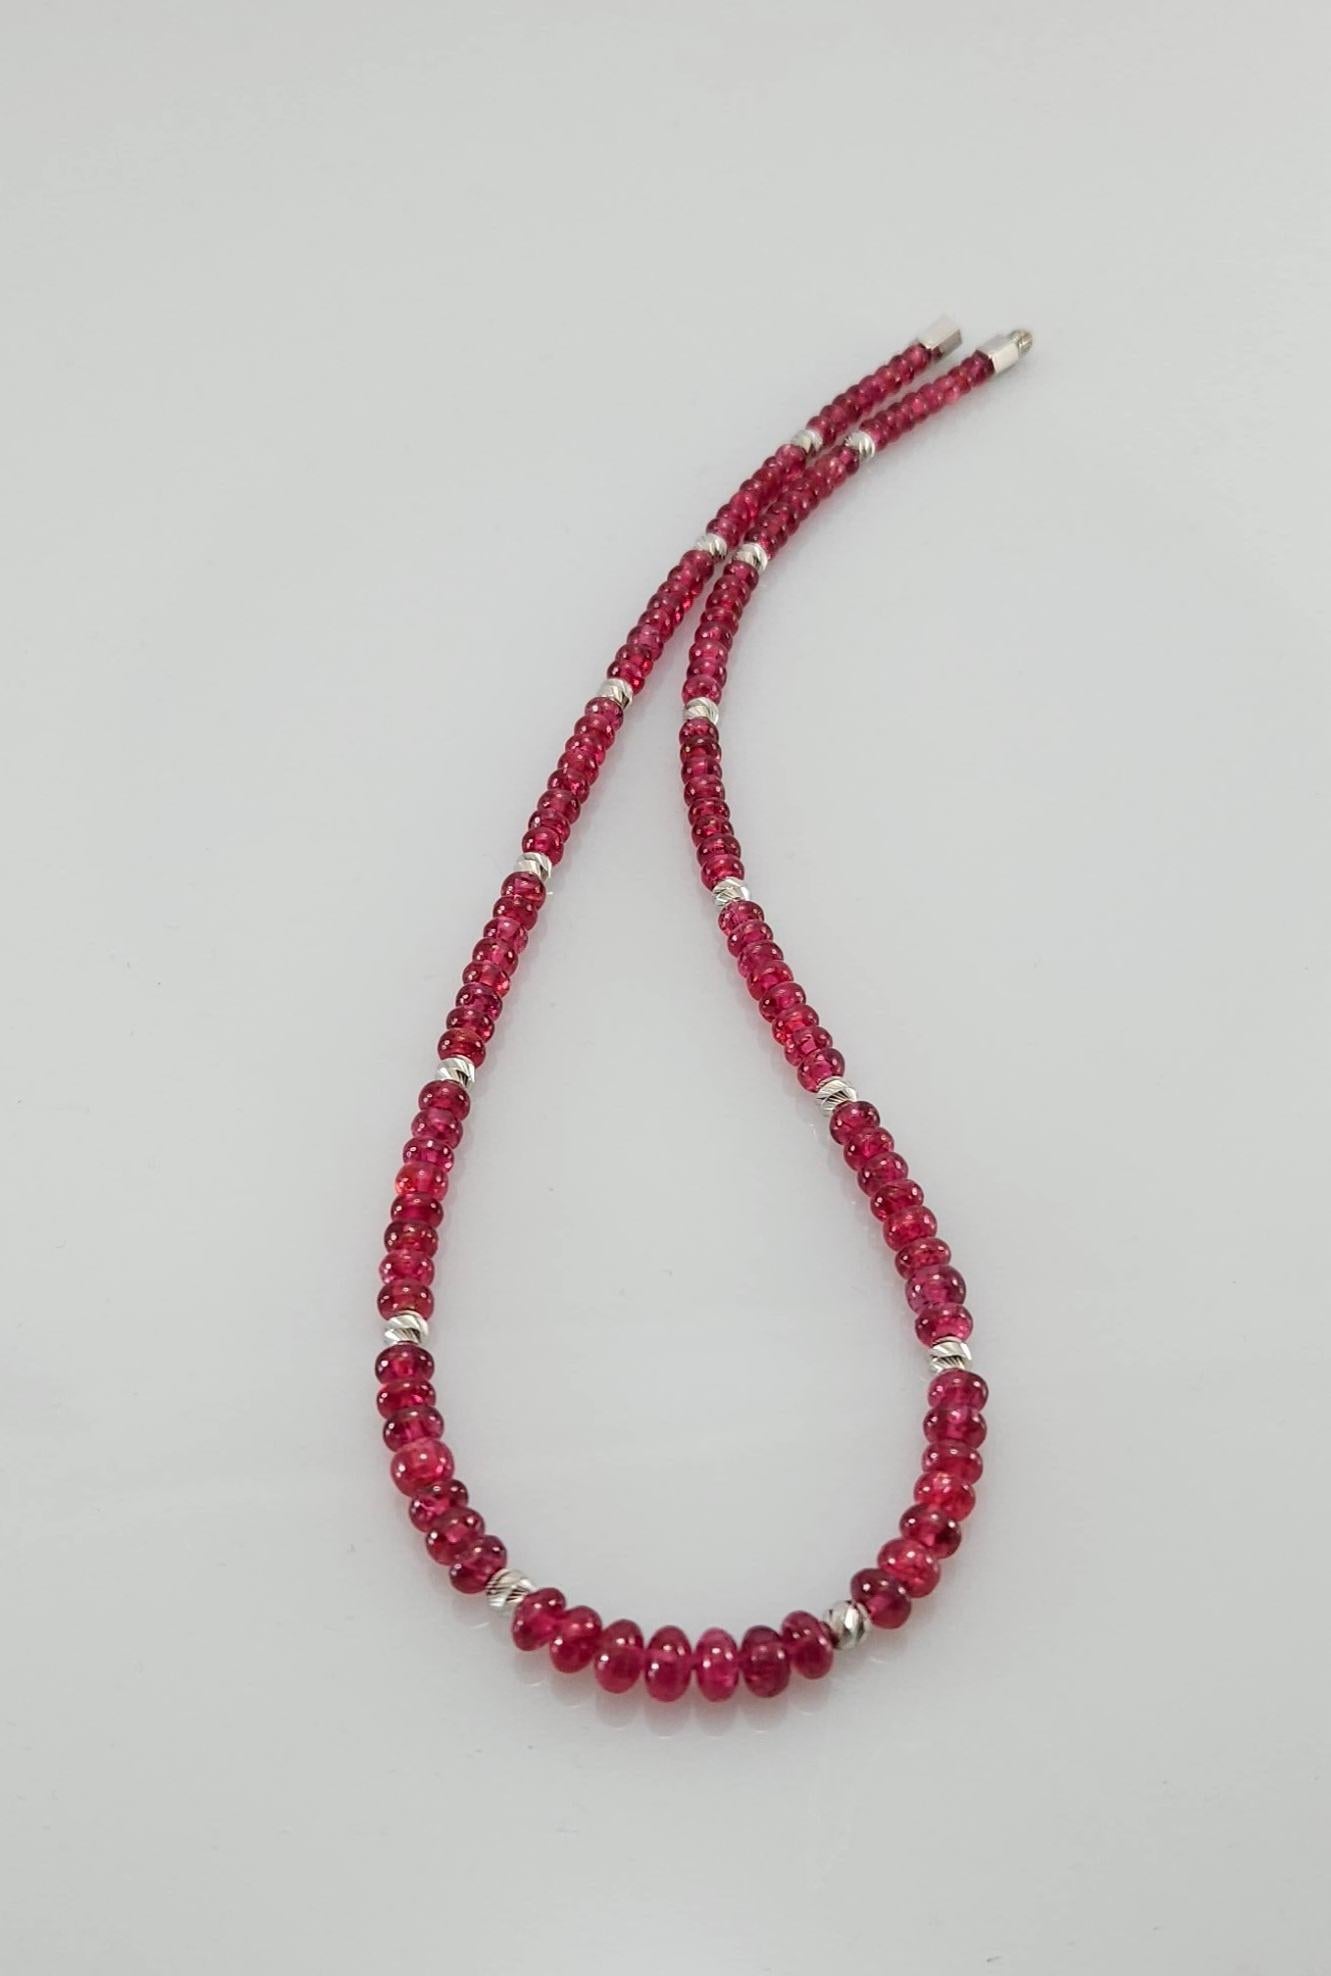 Red Spinel Rondel Beaded Necklace with 18 Carat White Gold For Sale 5